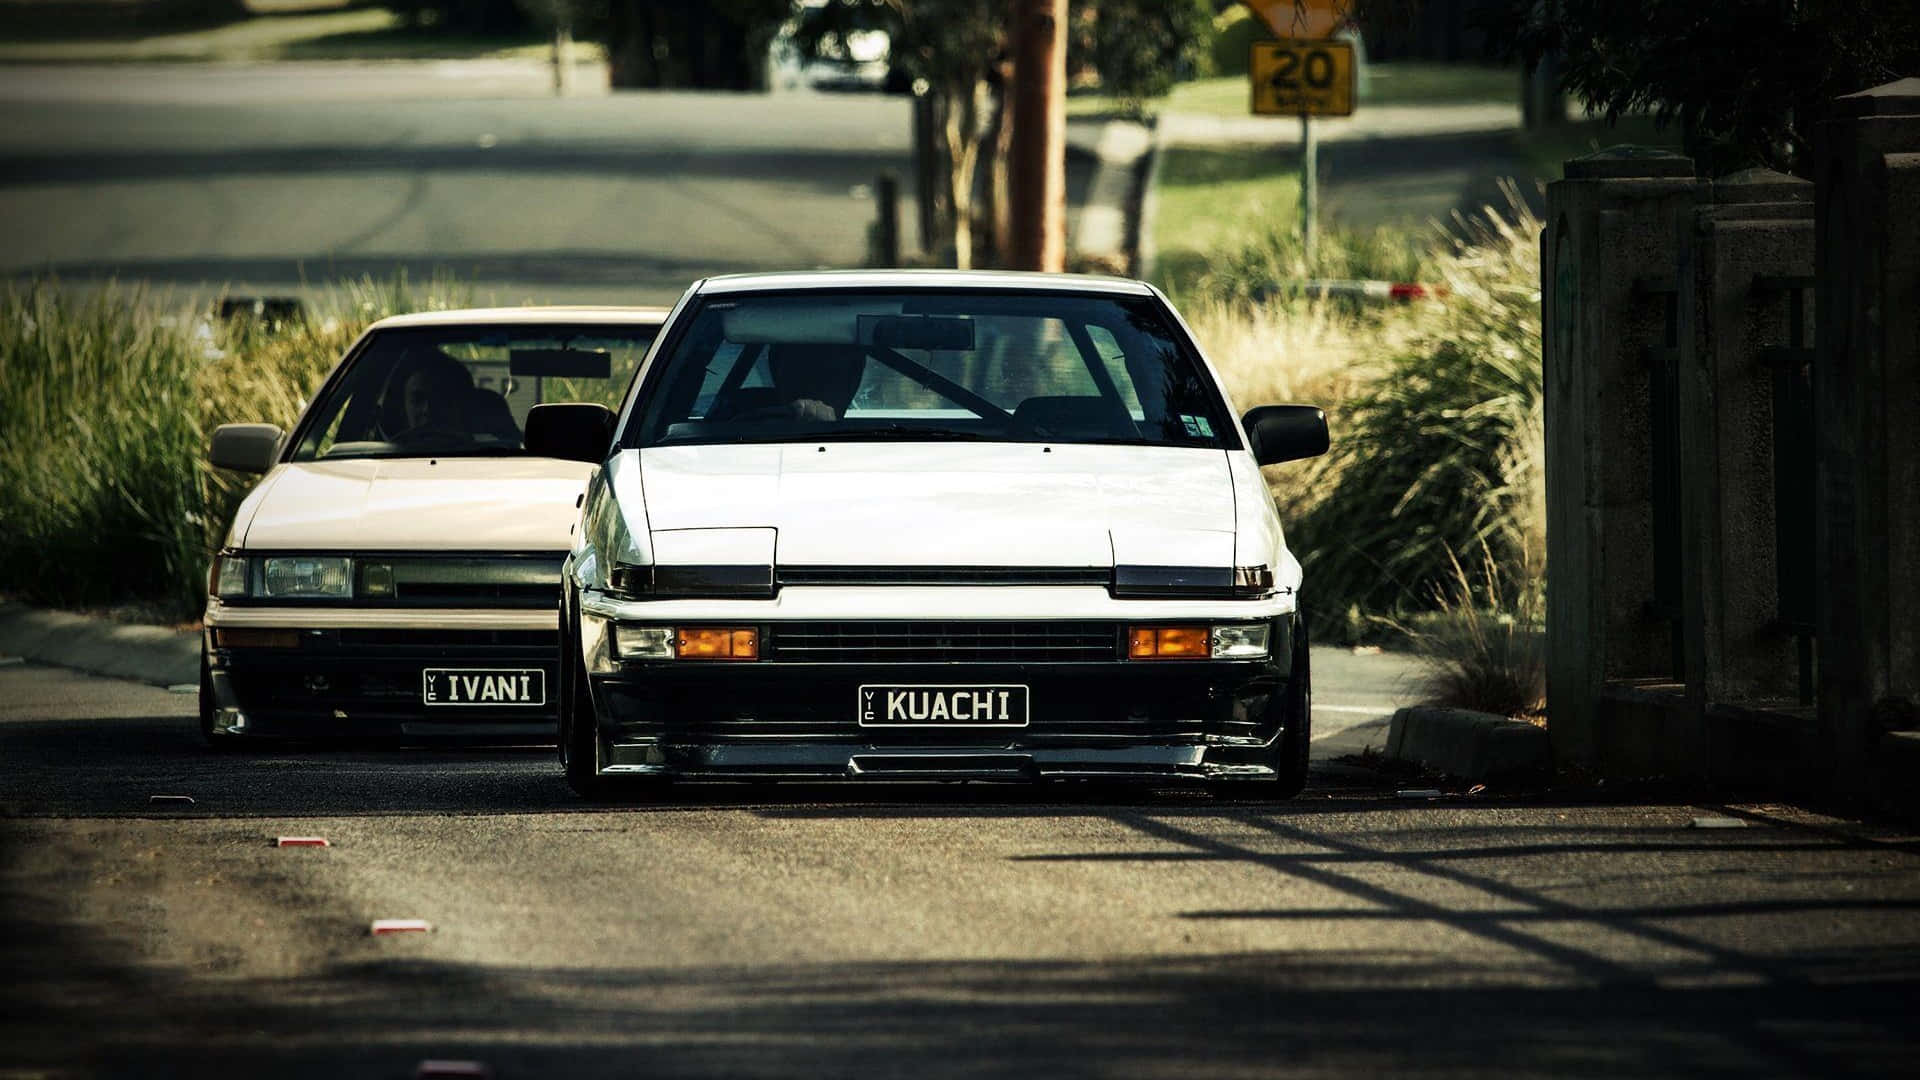 Klassisktoyota Corolla Ae86 (note: The Translation Is The Same As The Original Sentence And Doesn't Change In The Context Of Computer Or Mobile Wallpaper.) Wallpaper